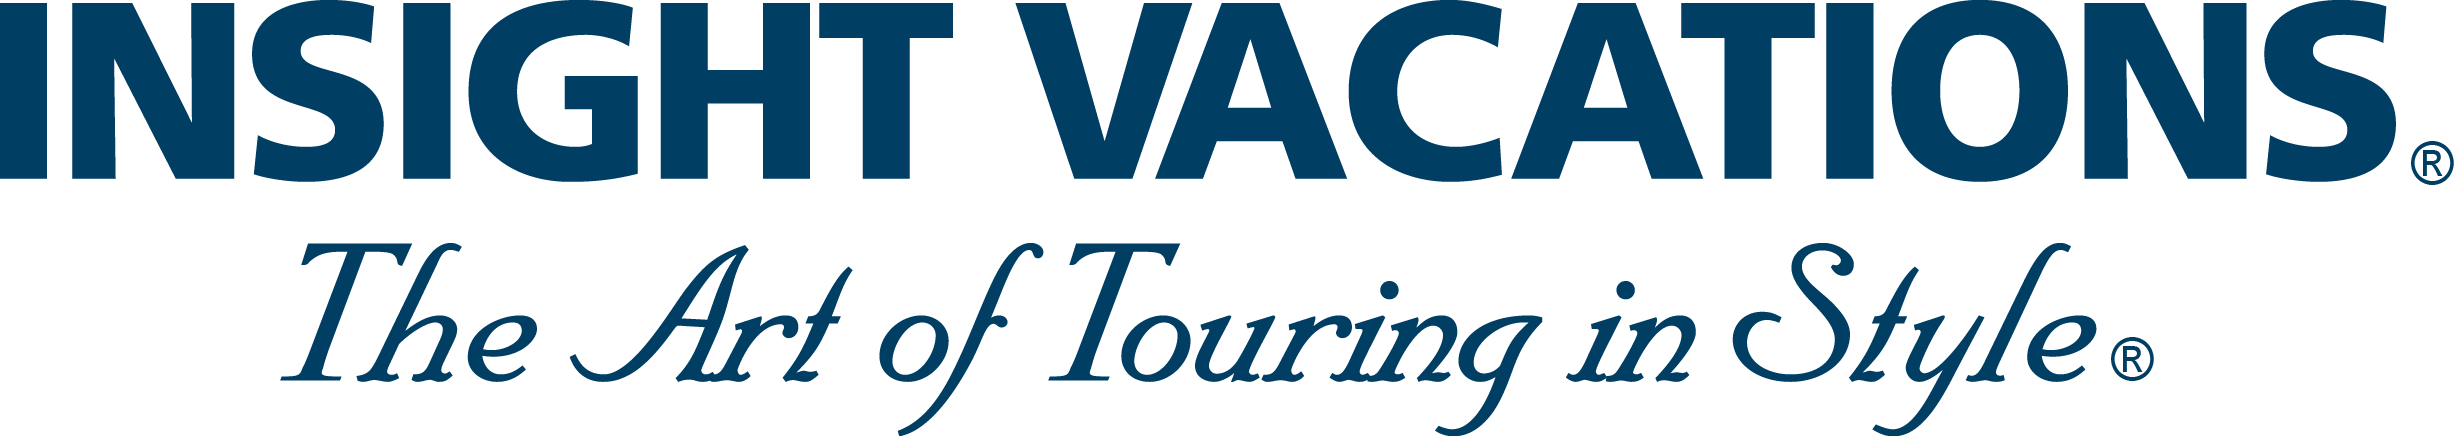 Insight Vacations coupons logo